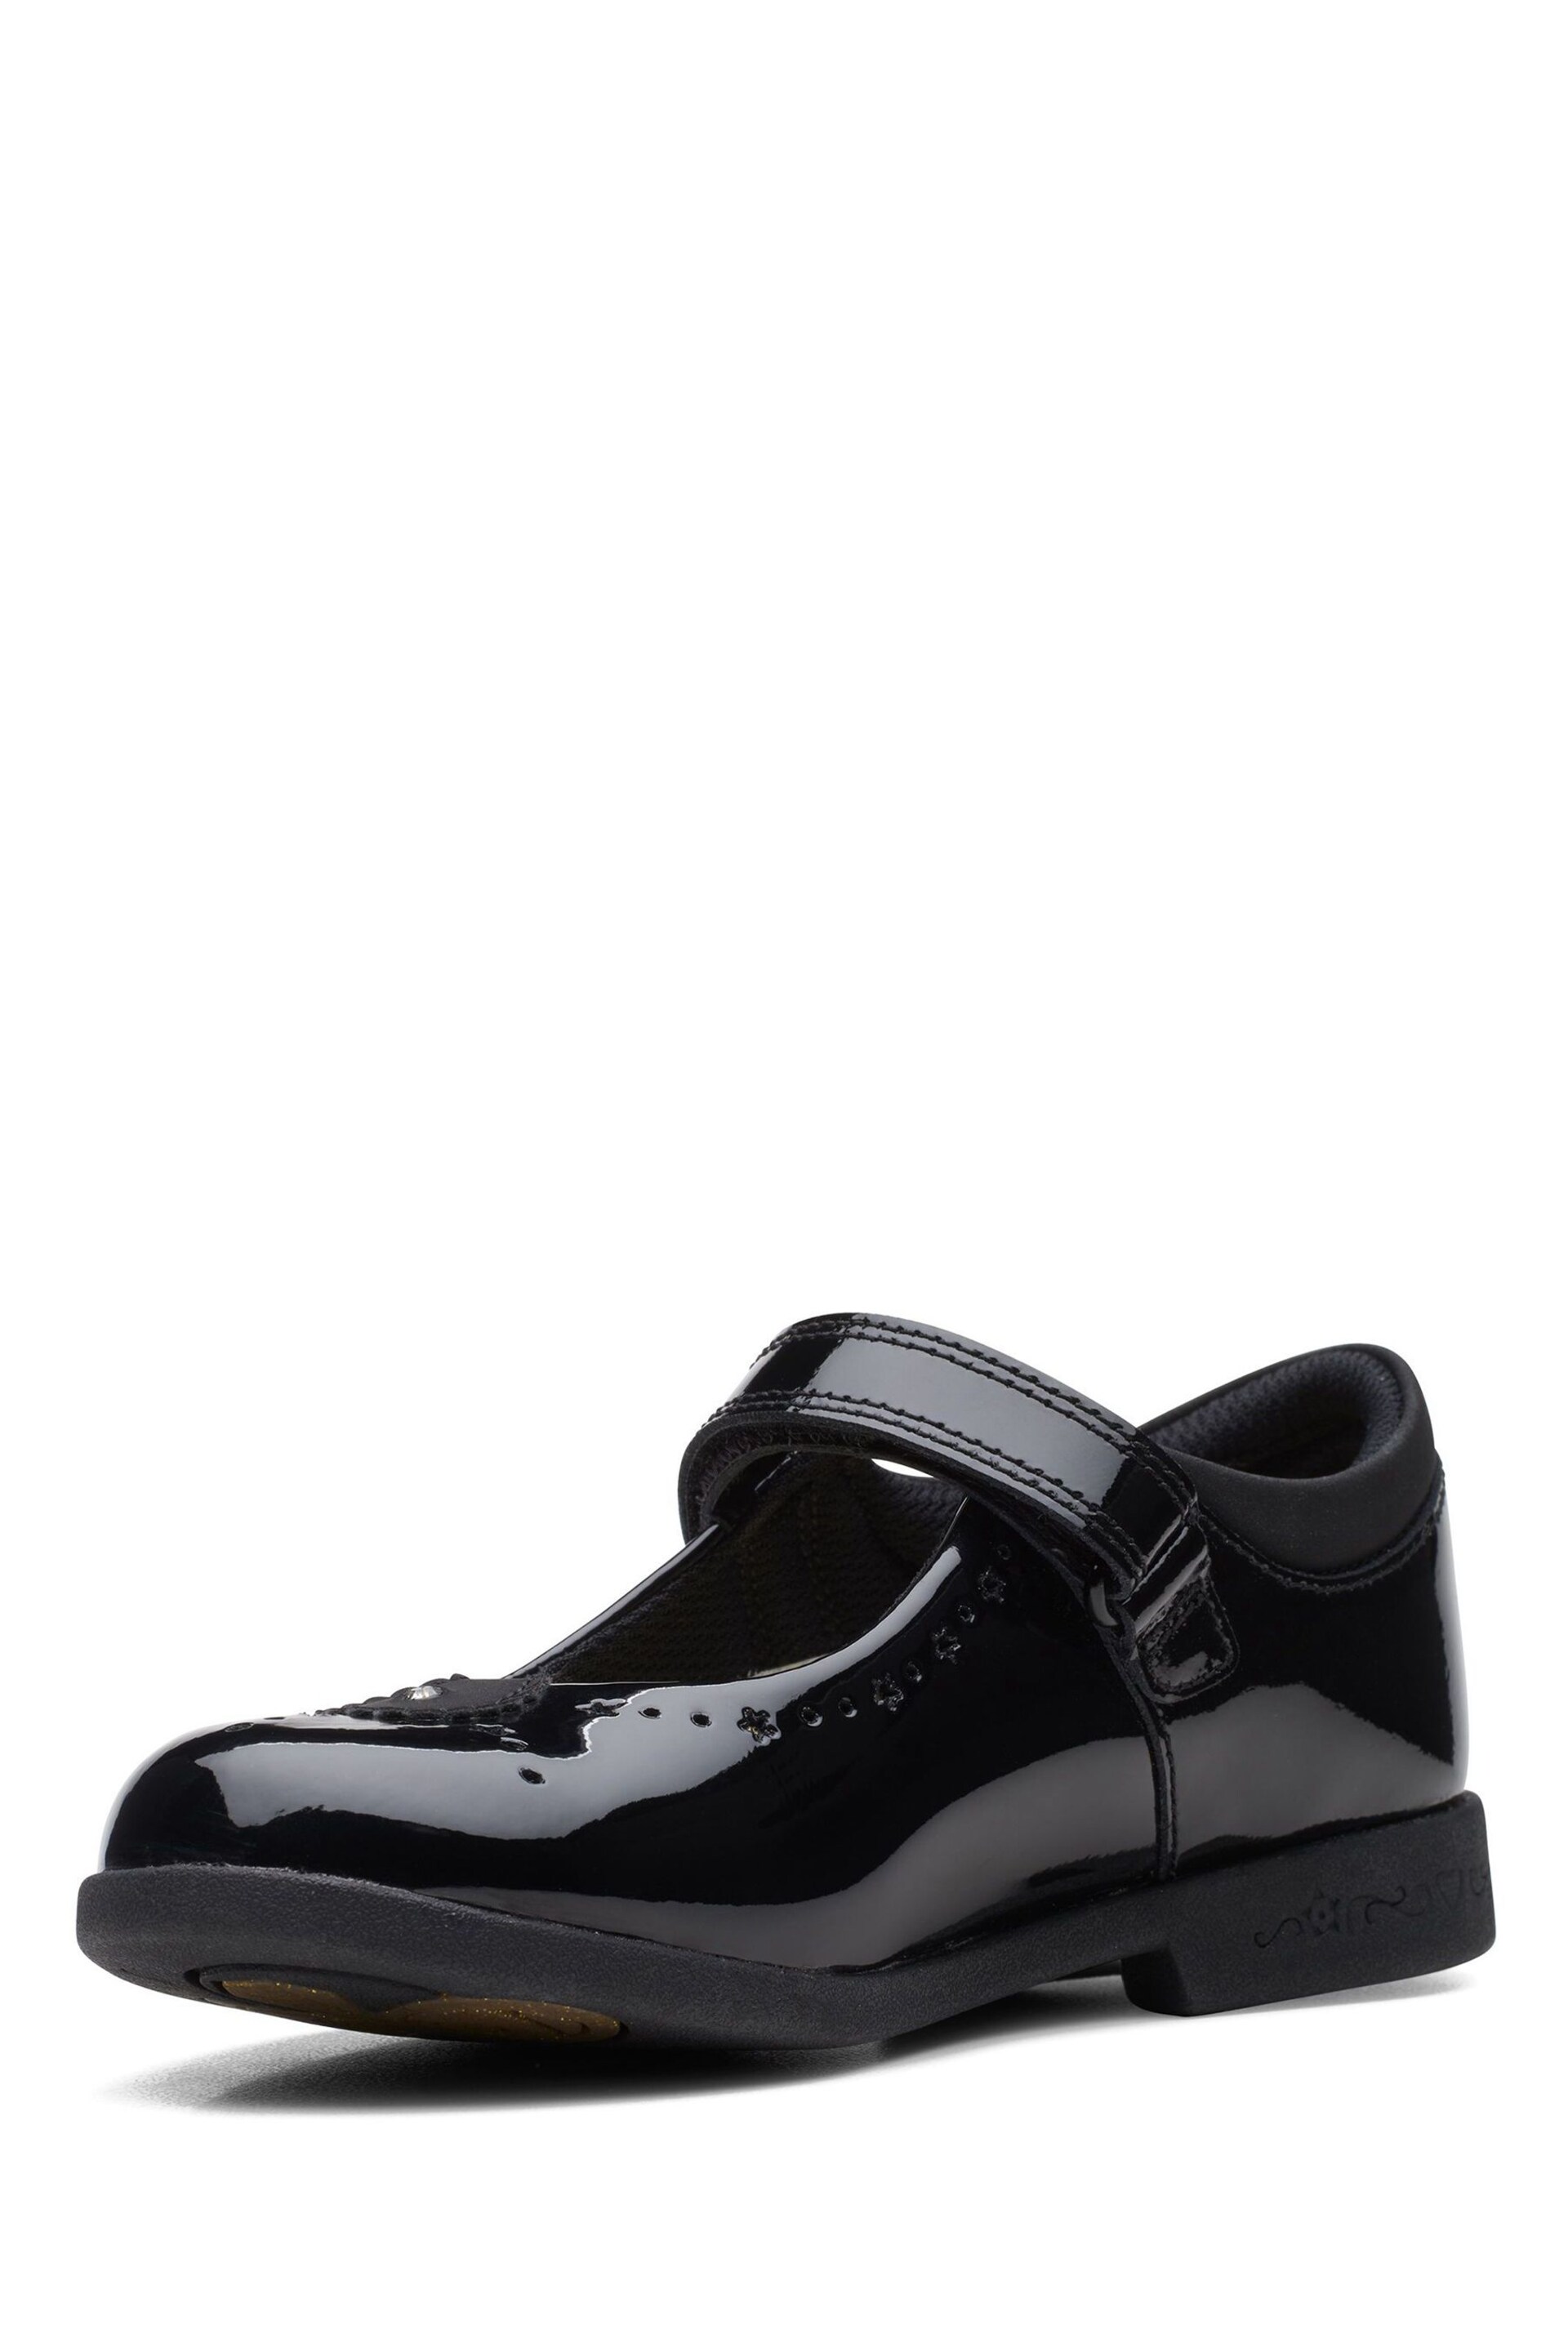 Clarks Black Multi Fit Patent Magic Step Bar Shoes - Image 4 of 7